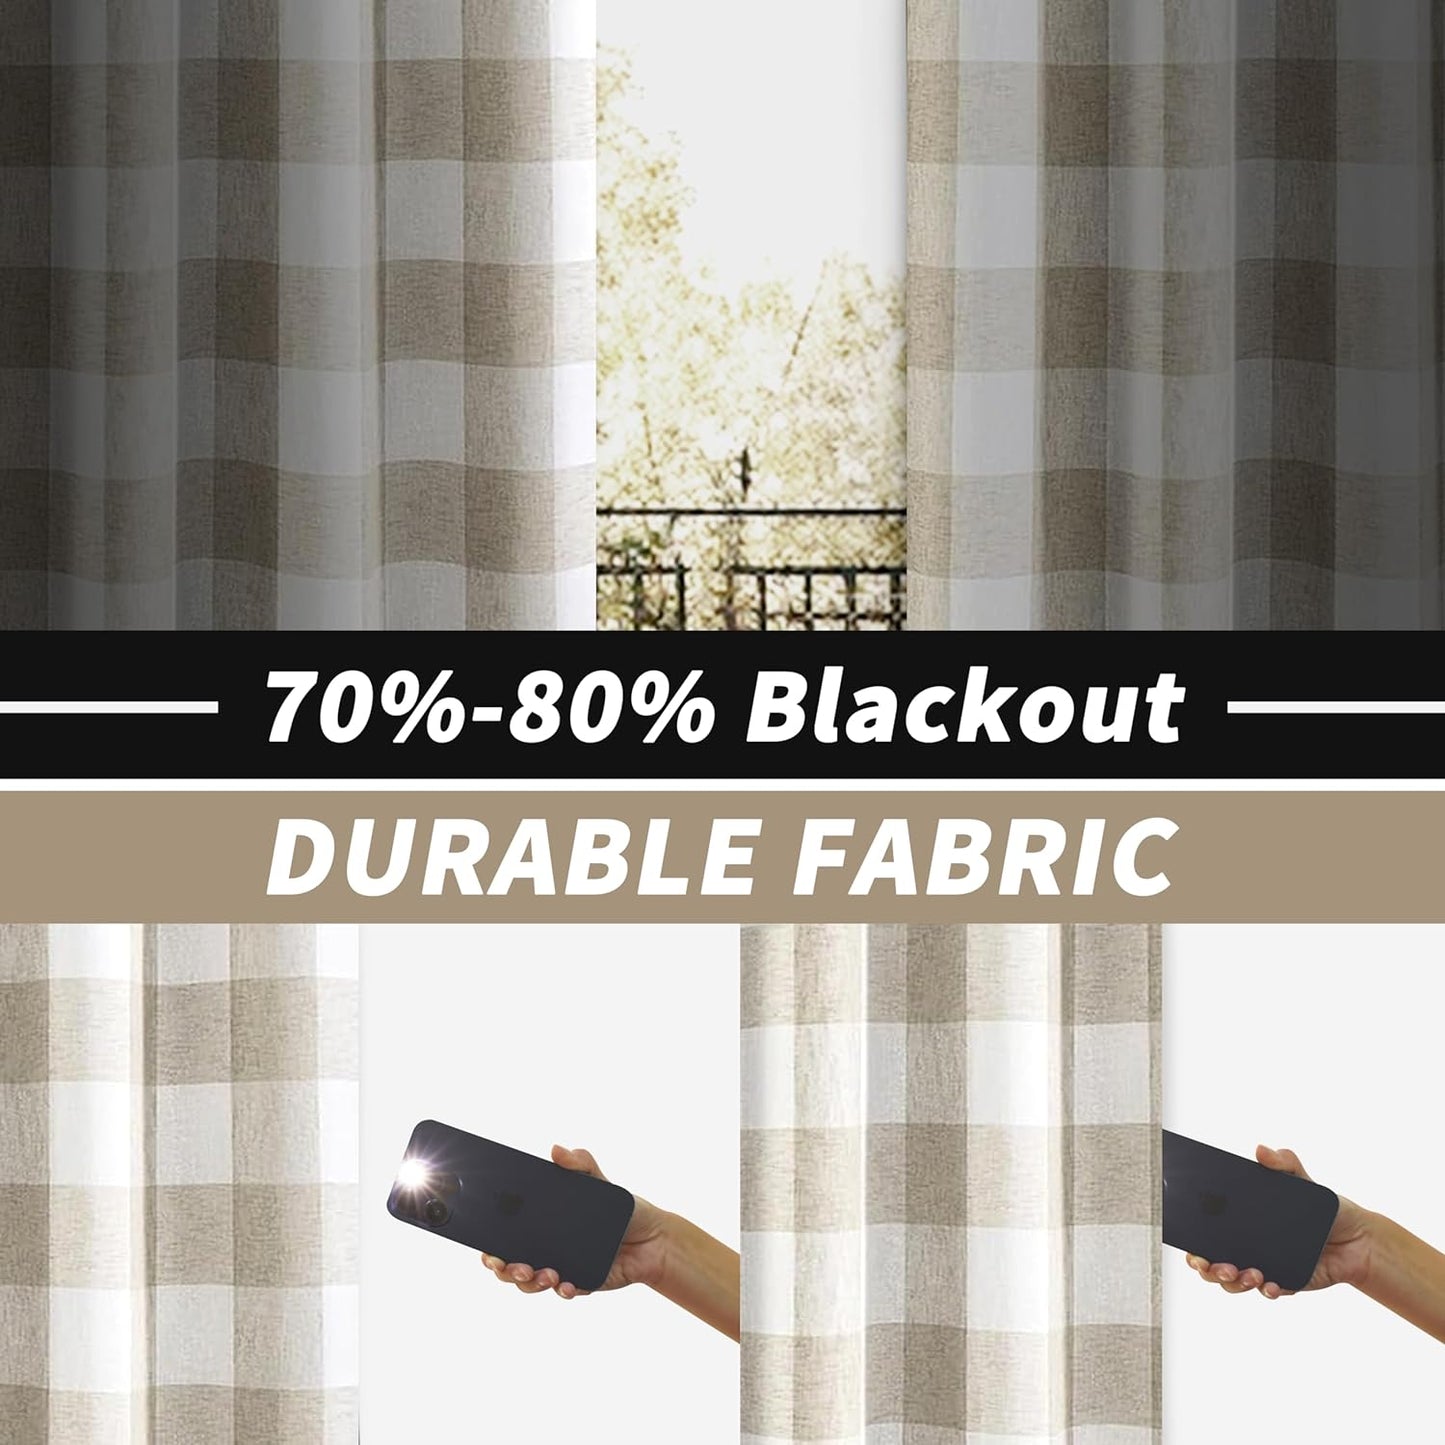 Driftaway Room Divider Curtain 84 Inches Long Blackout Privacy Patio Door Sliding Glass Door Curtains Extra Wide Closet Curtain for Bedroom Grommet Buffalo Check Plaid 108W X 84L Inch Taupe 1 Panel  DriftAway   